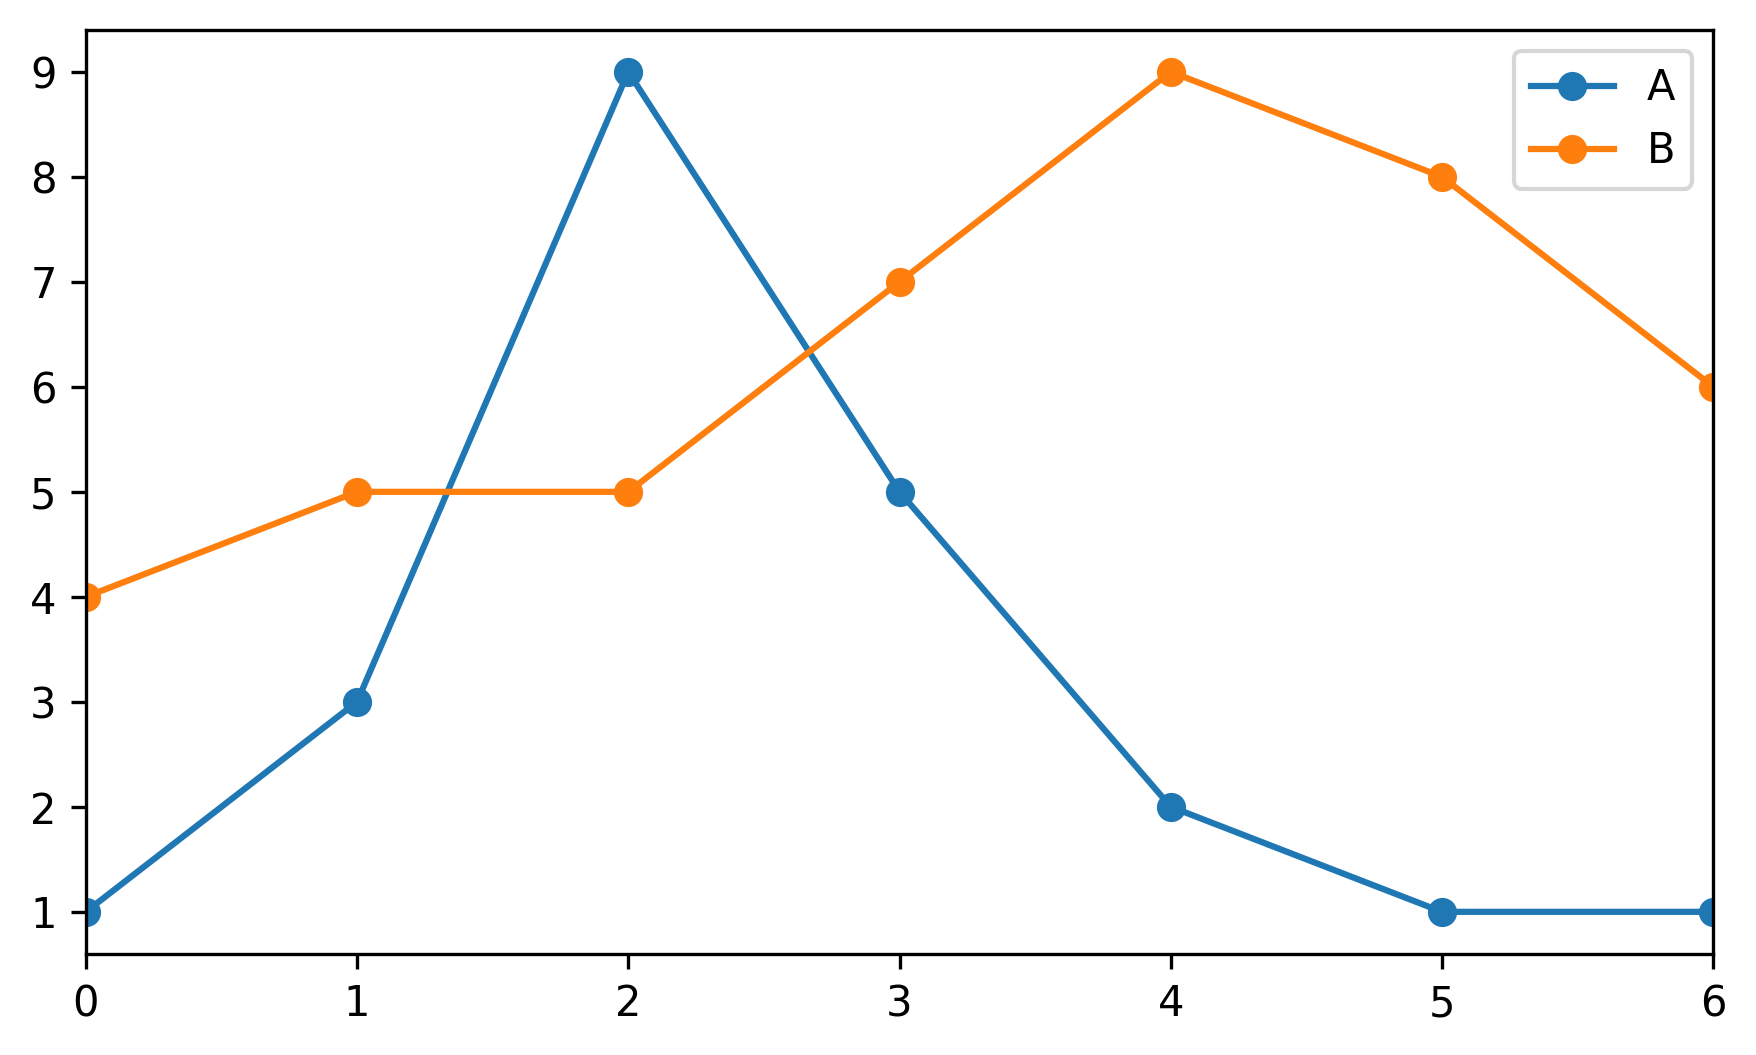 A simple chart consisted of two lines, one blue line, and one orange line. The lines are on a white background.